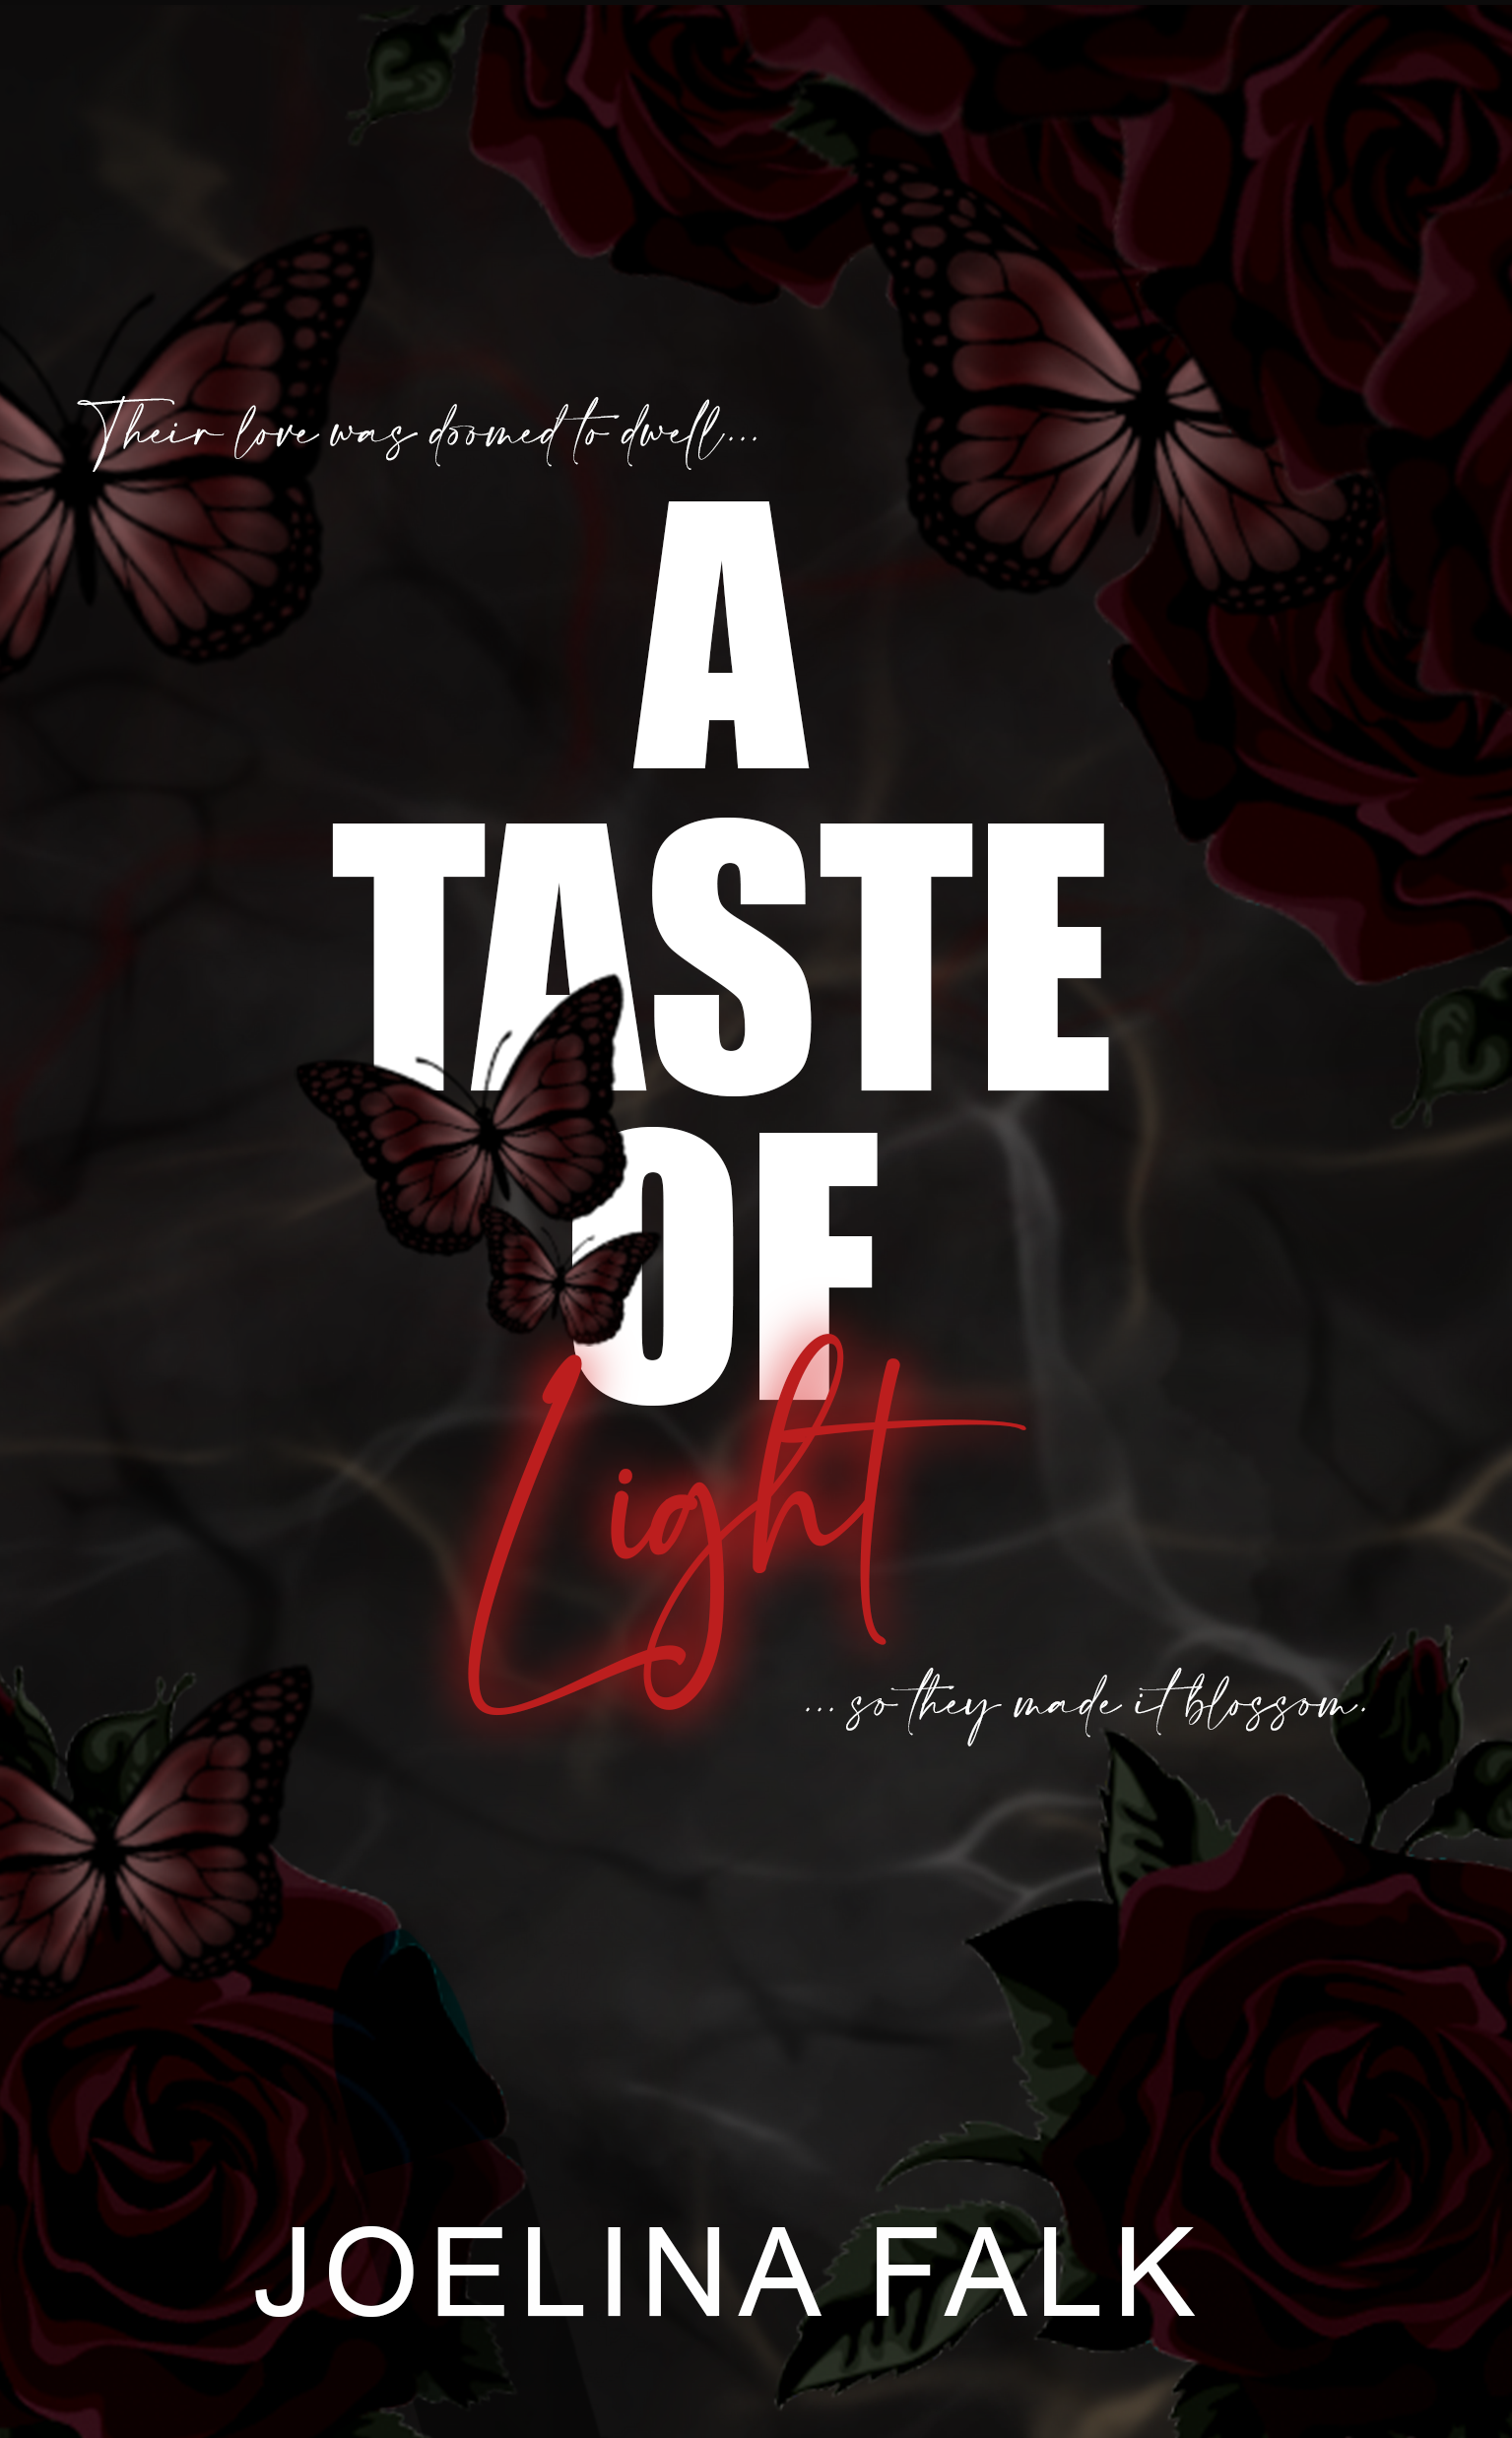 "Dark background with deep red roses and butterflies. The glowing red text 'A Taste of Light' stands out in the center, with additional smaller text and the author's name, Joelina Falk, at the bottom."